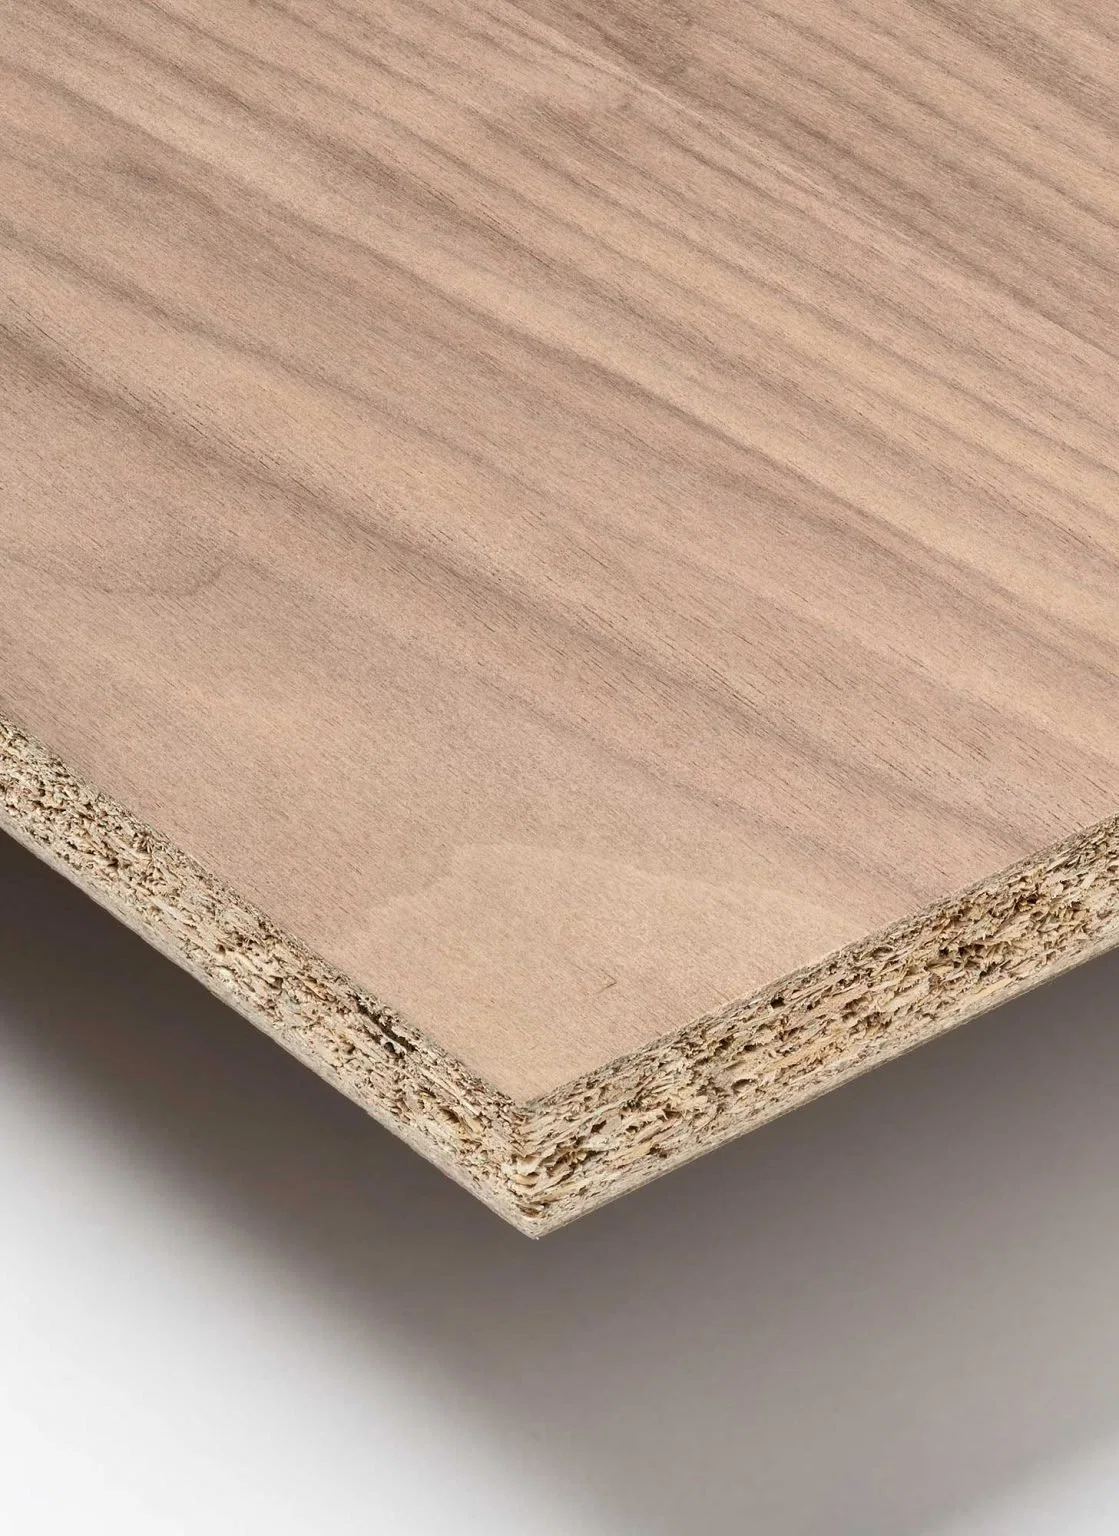 9mm, 12mm, 18mm, 22mm Chipboard/Particle Board for Wooden Building Construction